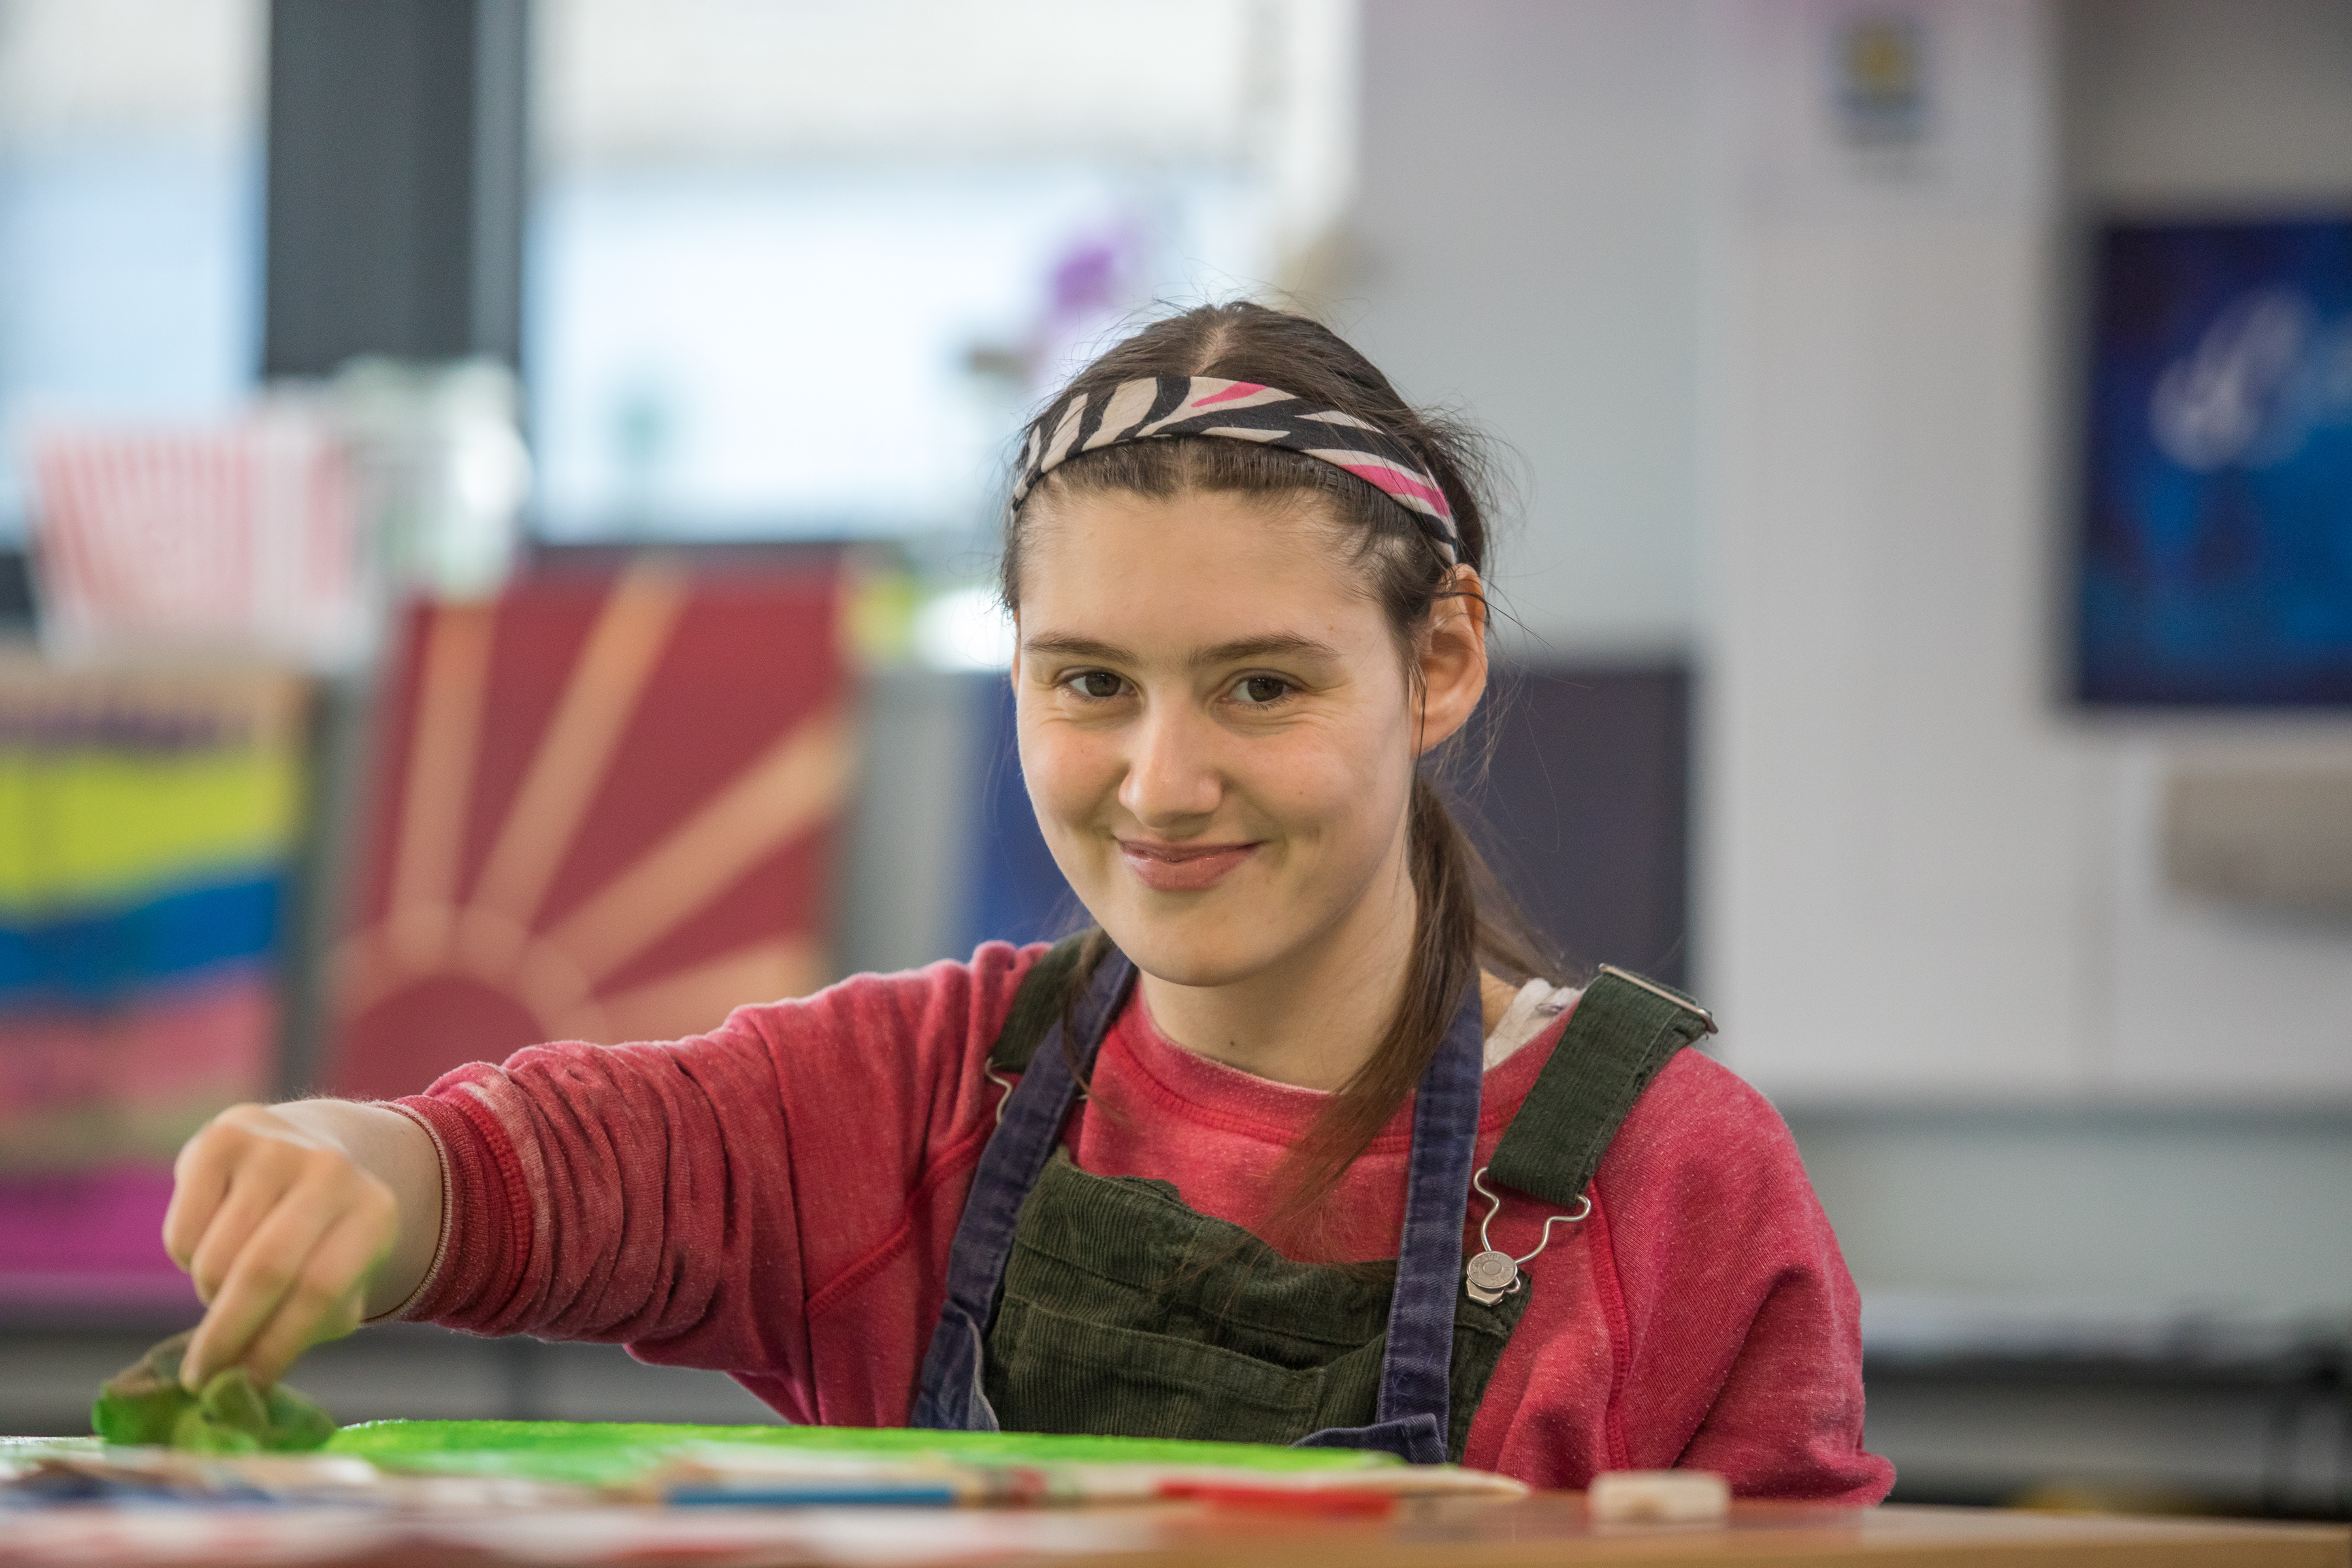 Learner in an apron smiling at the camera as she sponges paint on paper